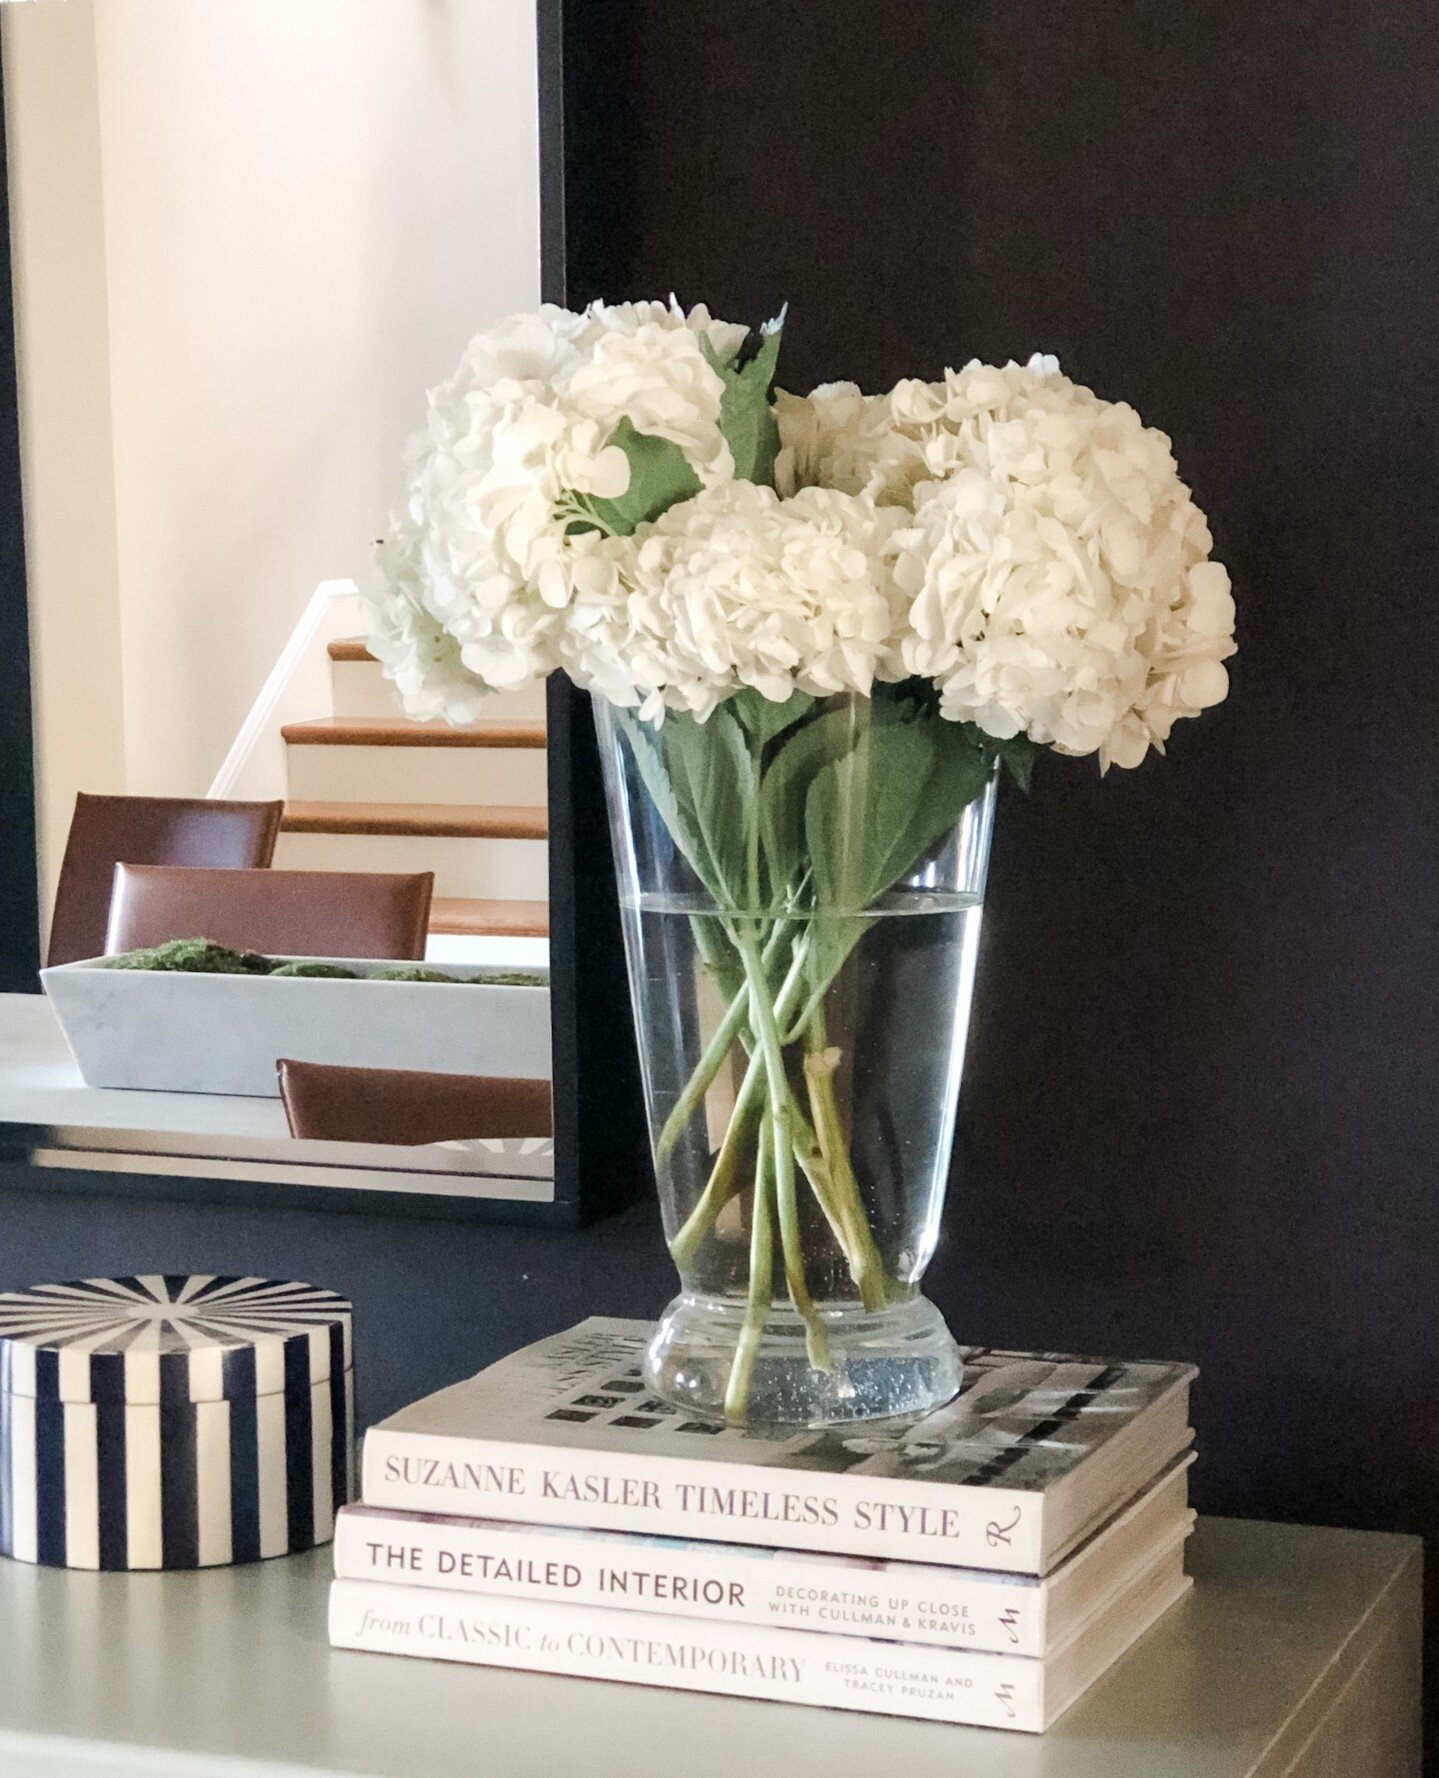 #floralfriday ... I don't know if I ever shared this shot from our #seacliffsplendorproject . This is a vignette on the dining room console. I love the black and white contrast, and that little bone inlay box is everything! Also, if you know me at al